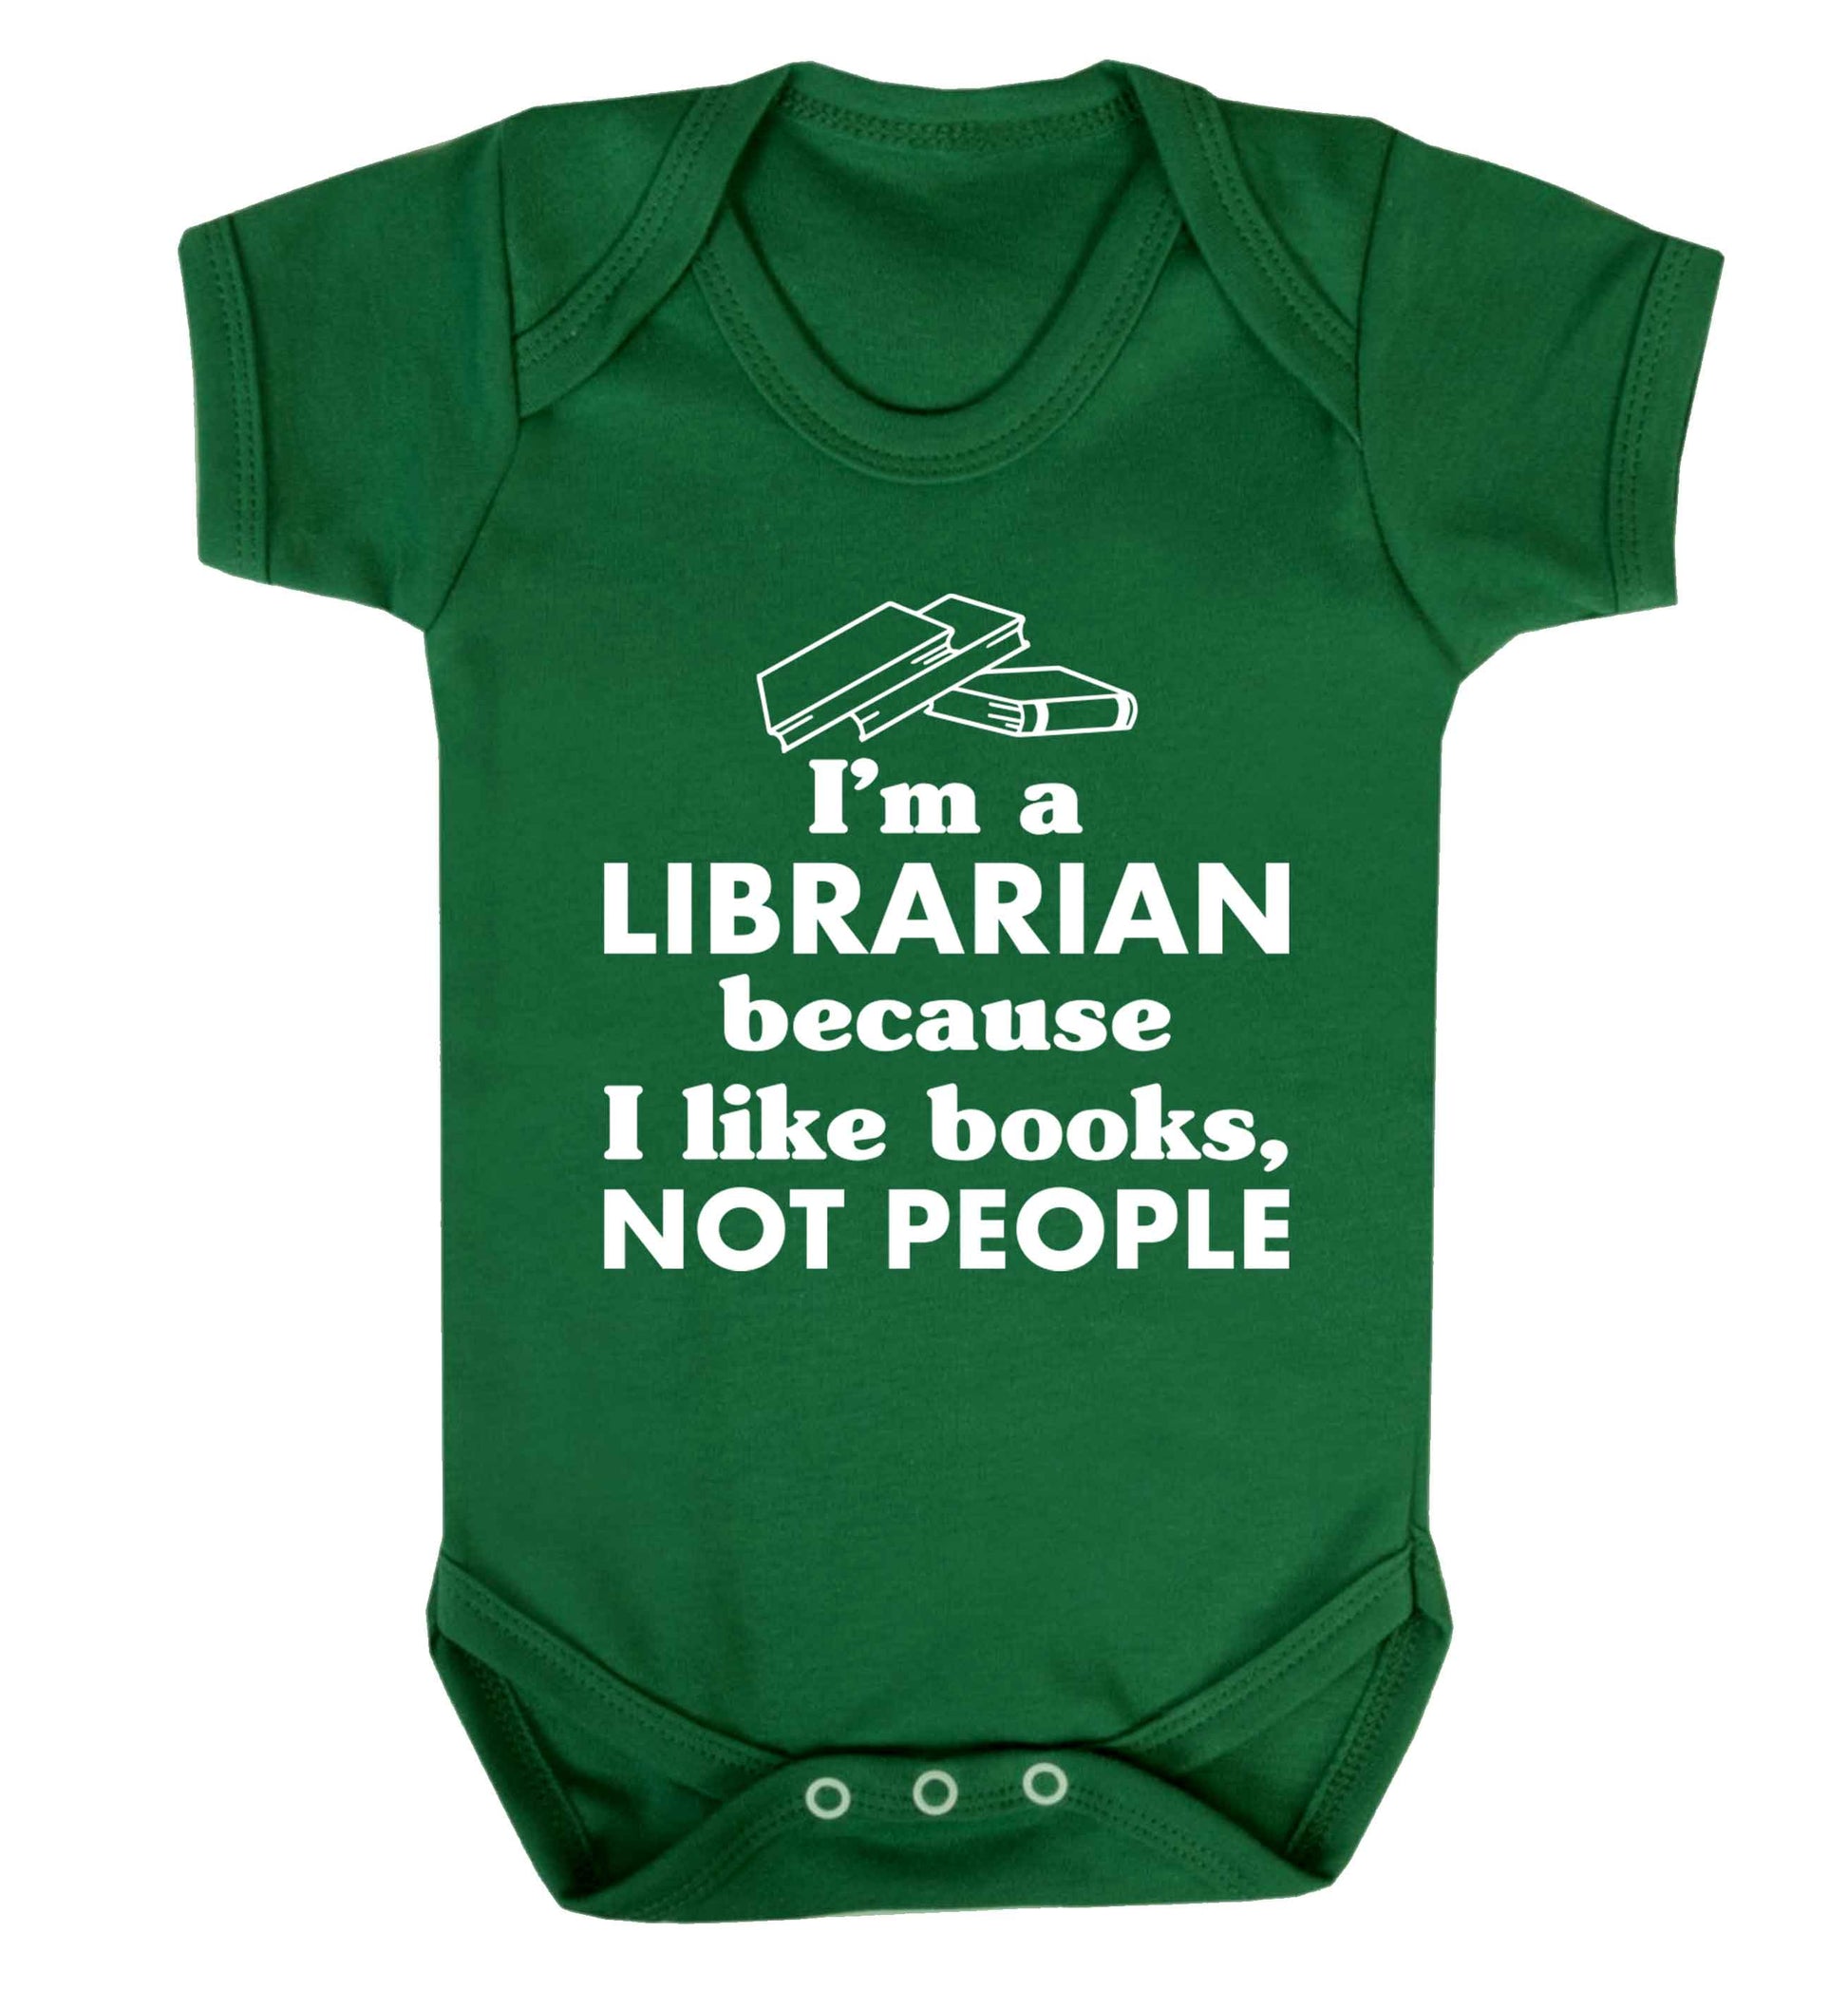 I'm a librarian because I like books not people Baby Vest green 18-24 months